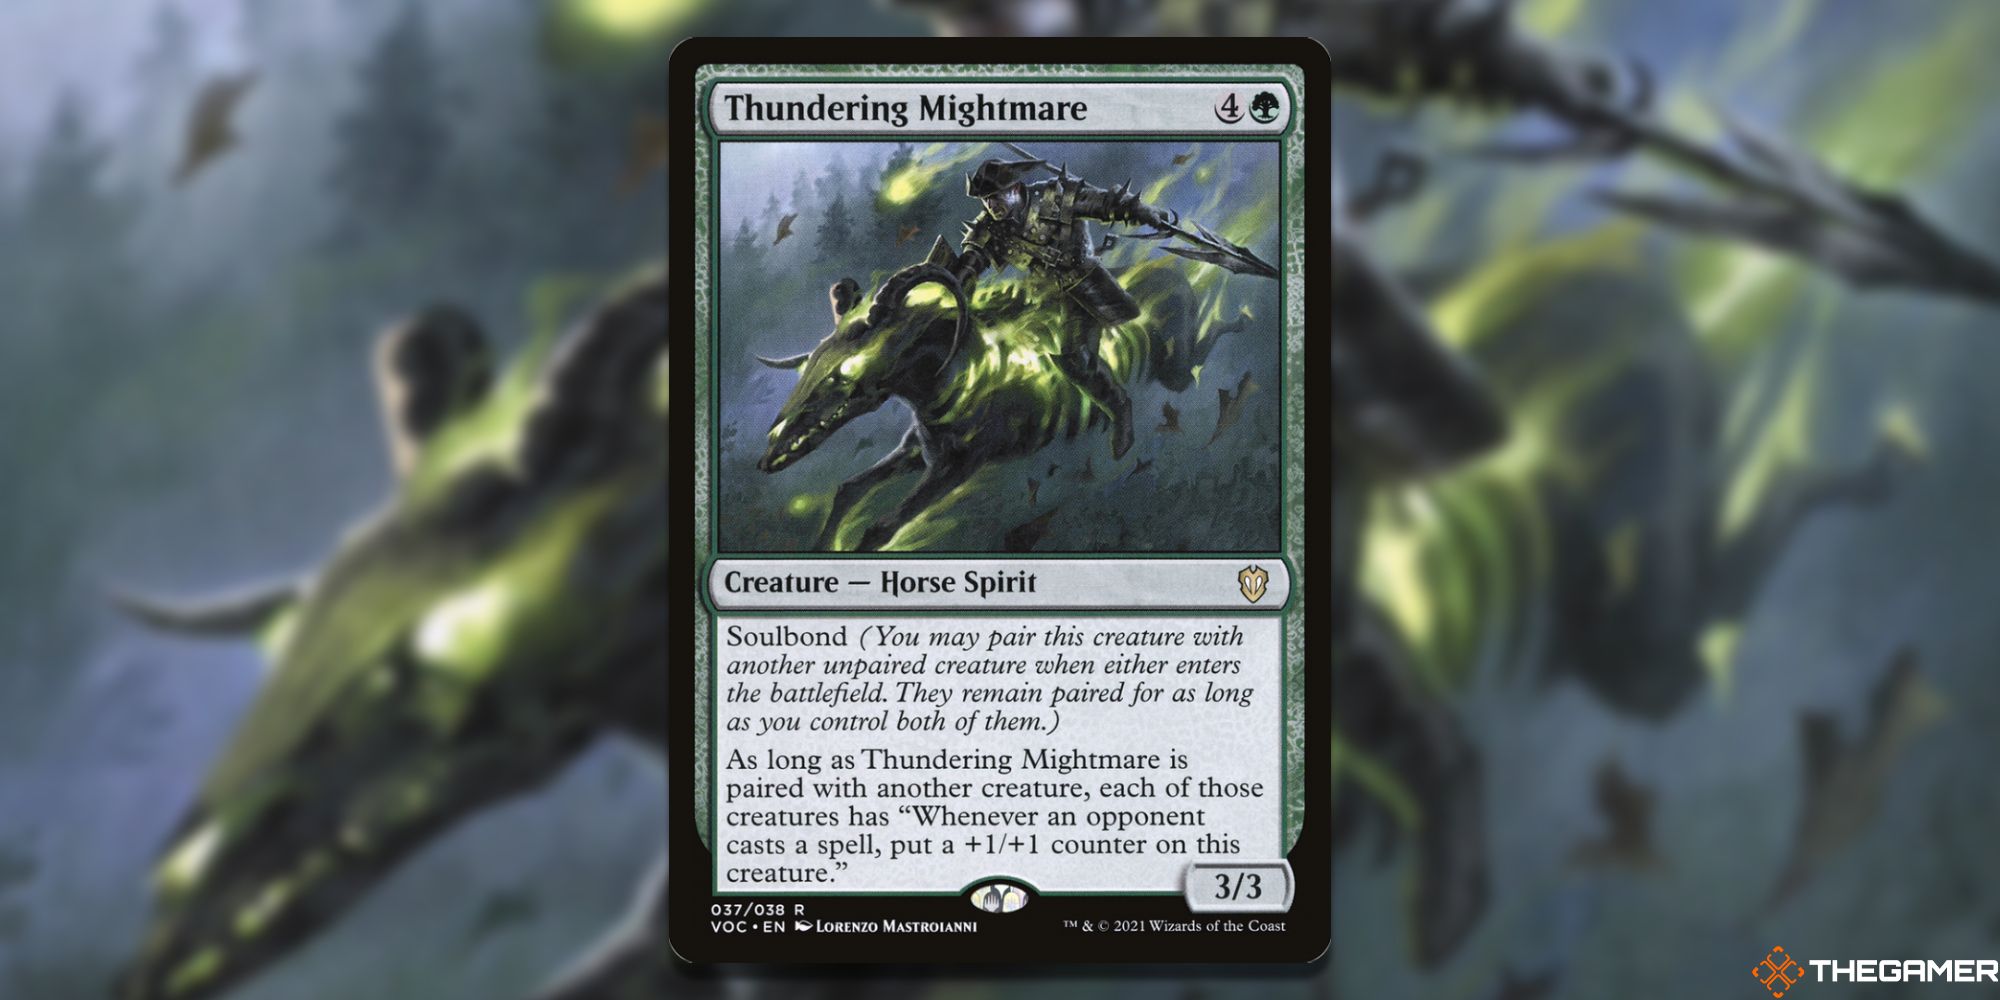 Thundering Mightmare card image in Magic: The Gathering, with artwork by Lorenzo Mastroianni